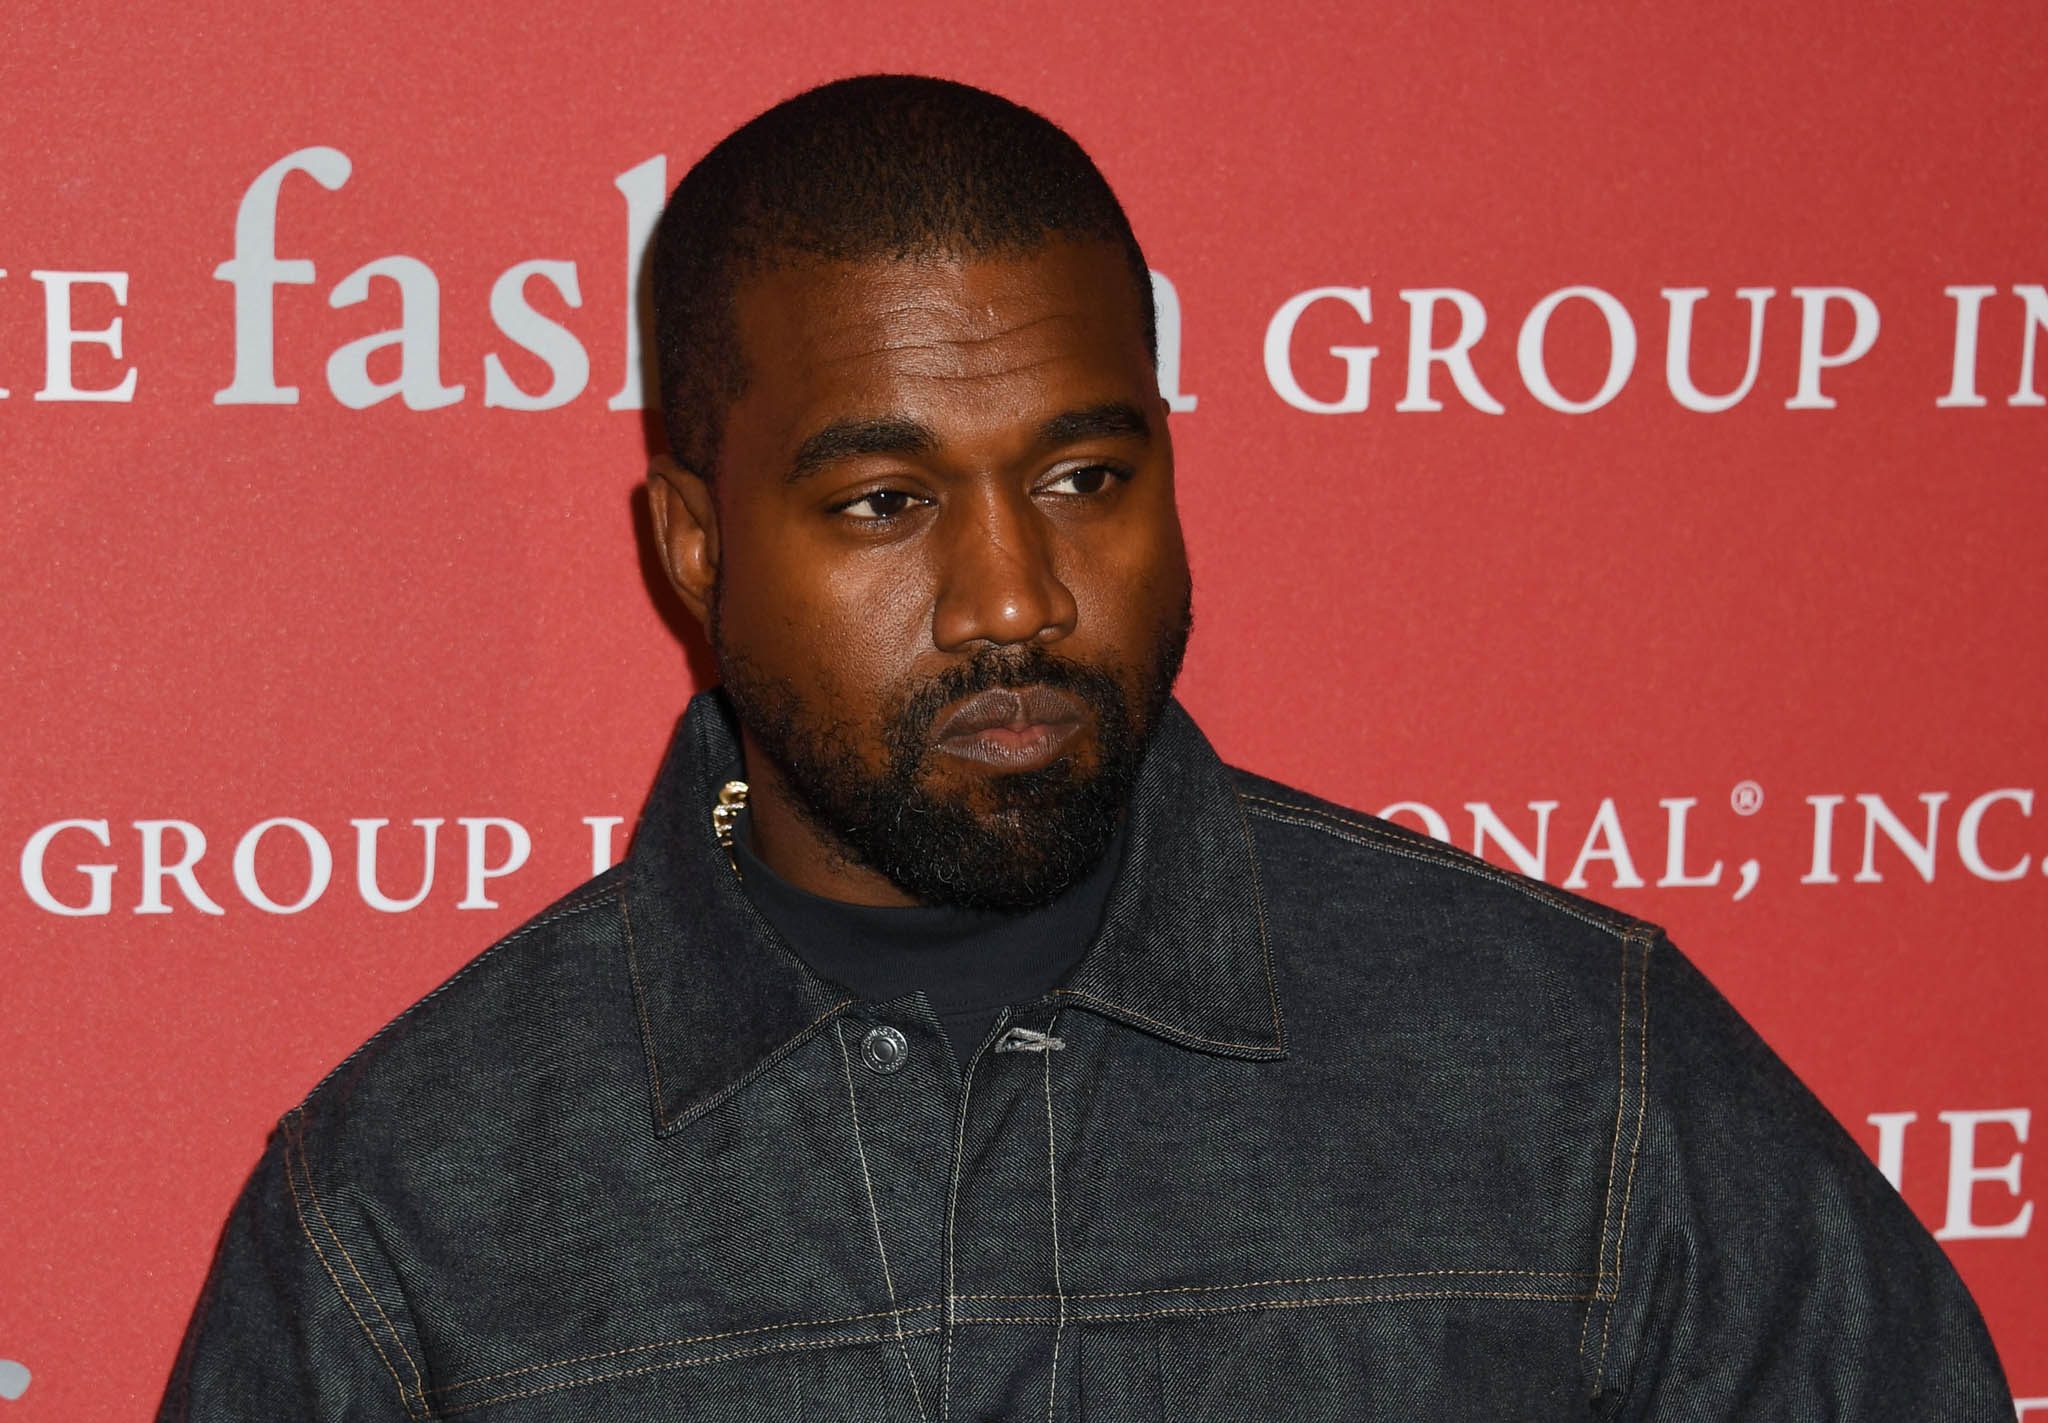 Find out why Kanye West is being sued